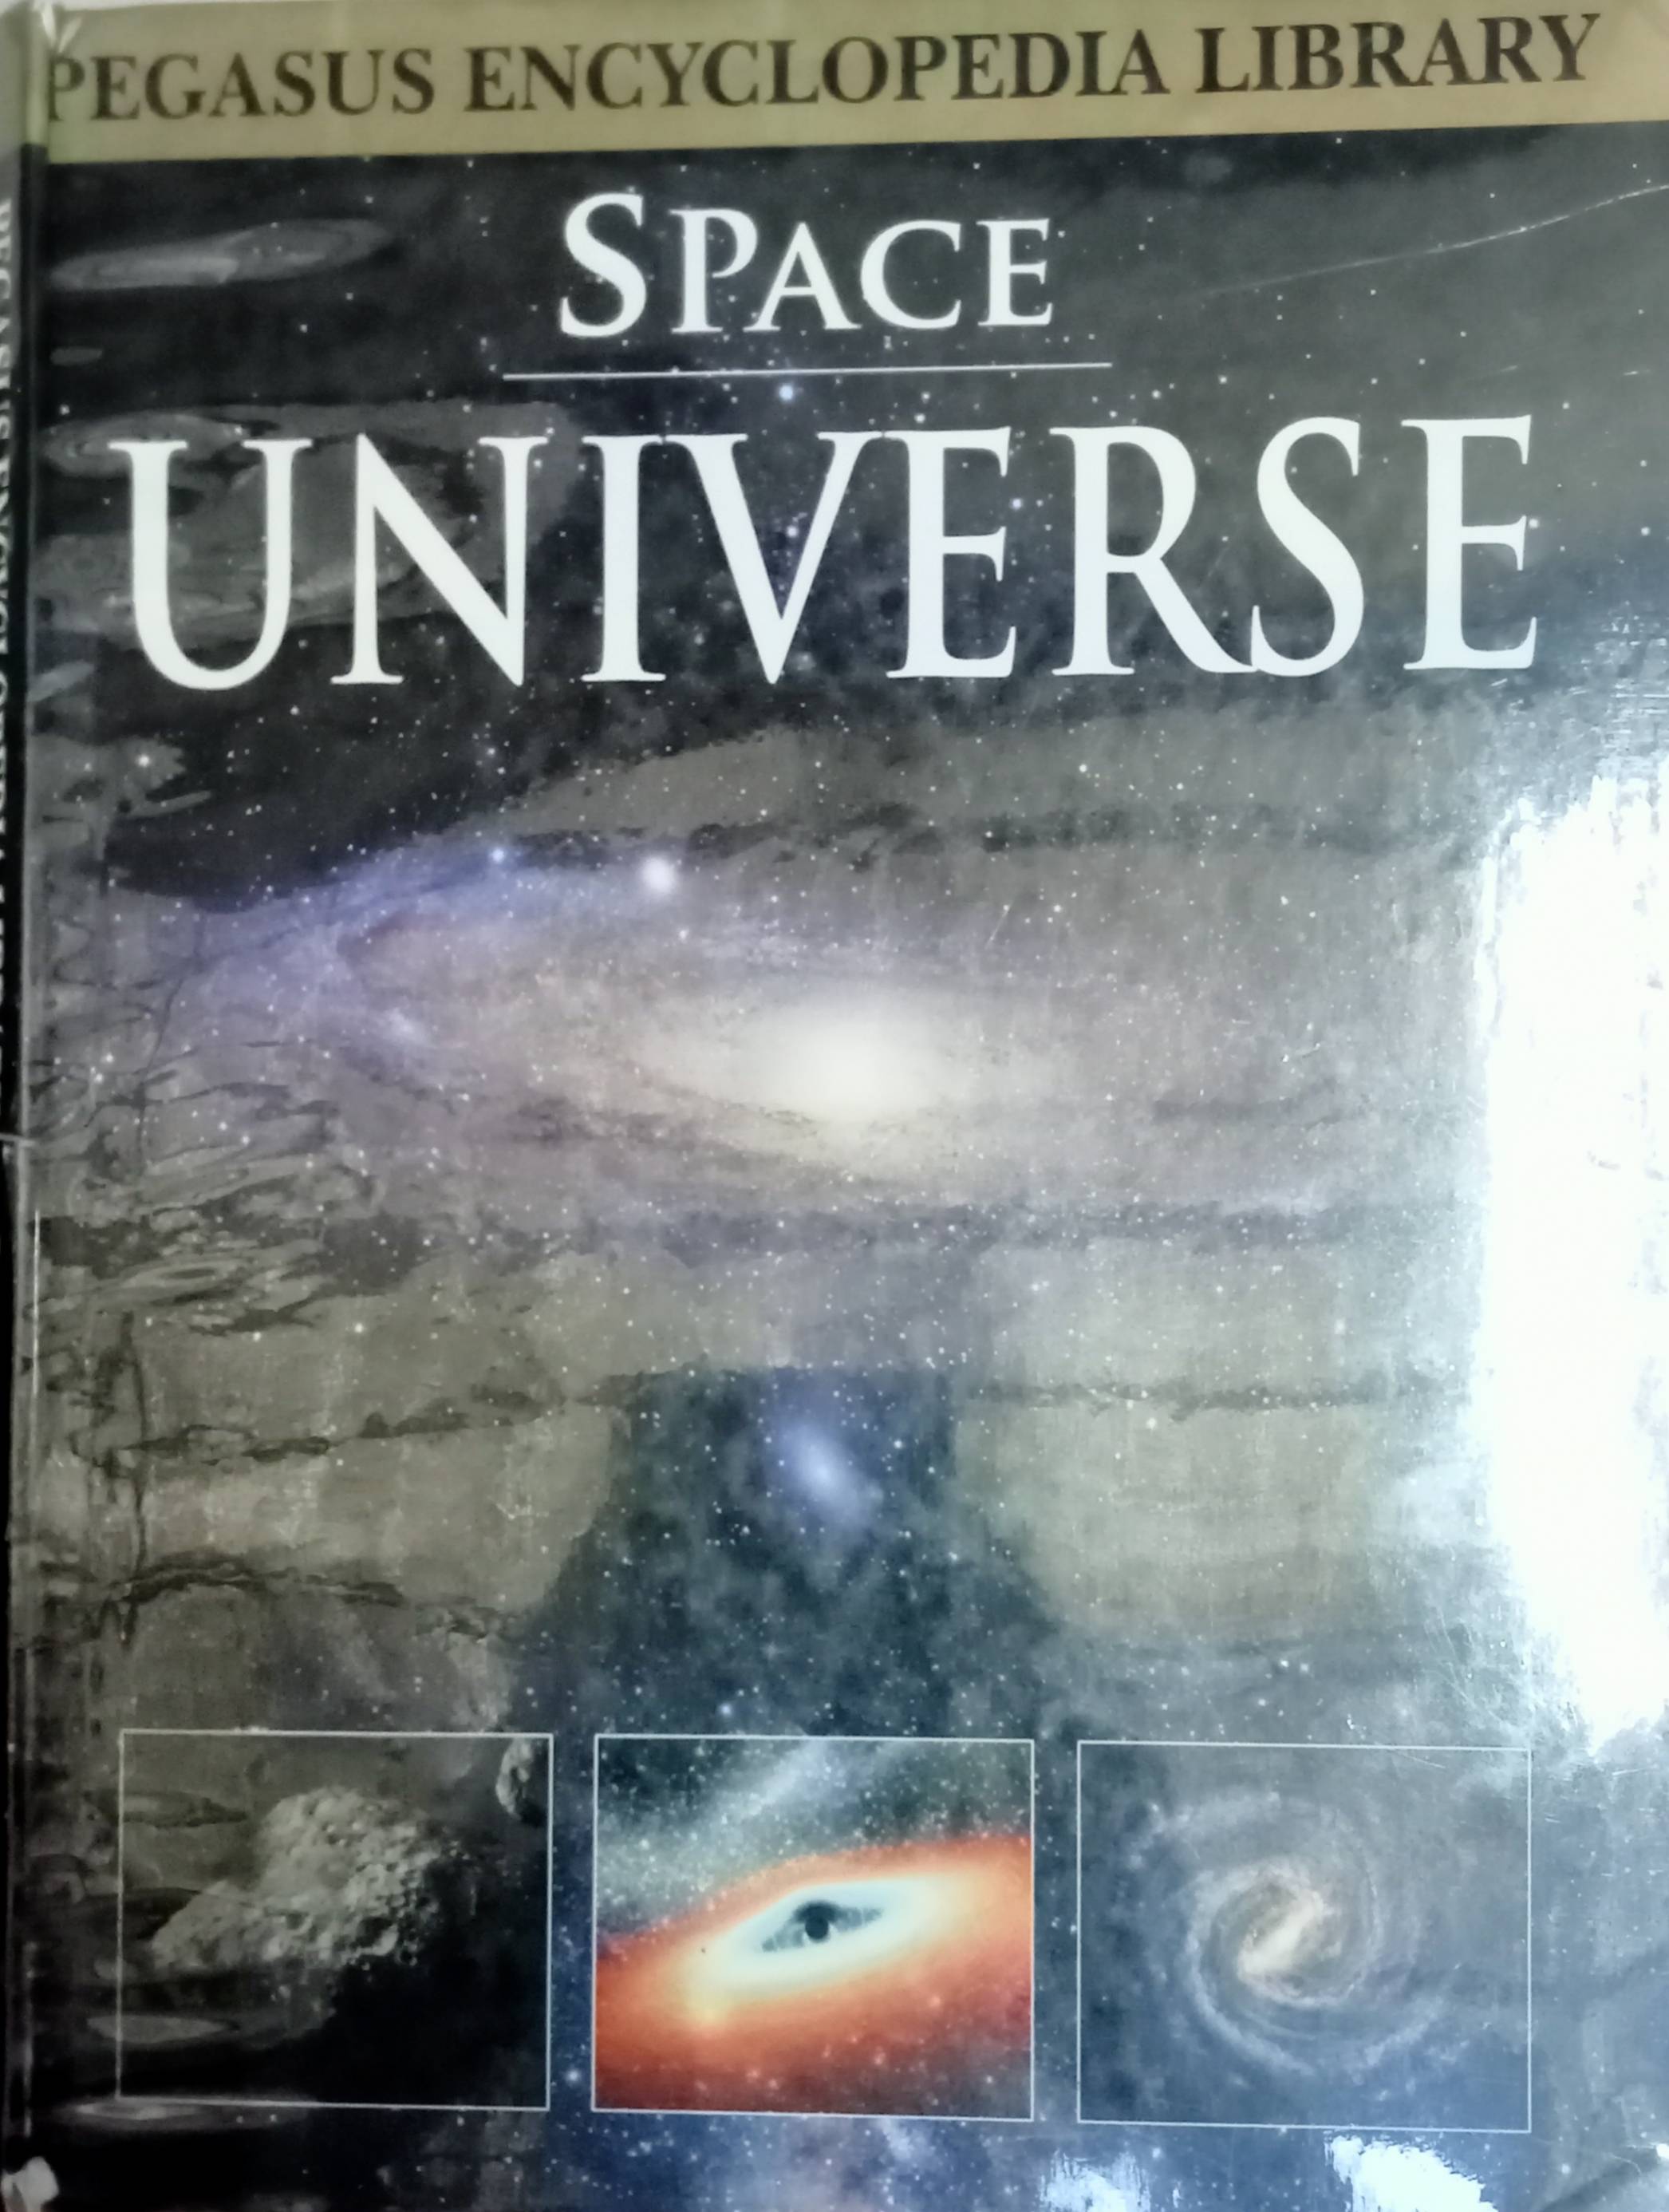 IMG : Space Universe